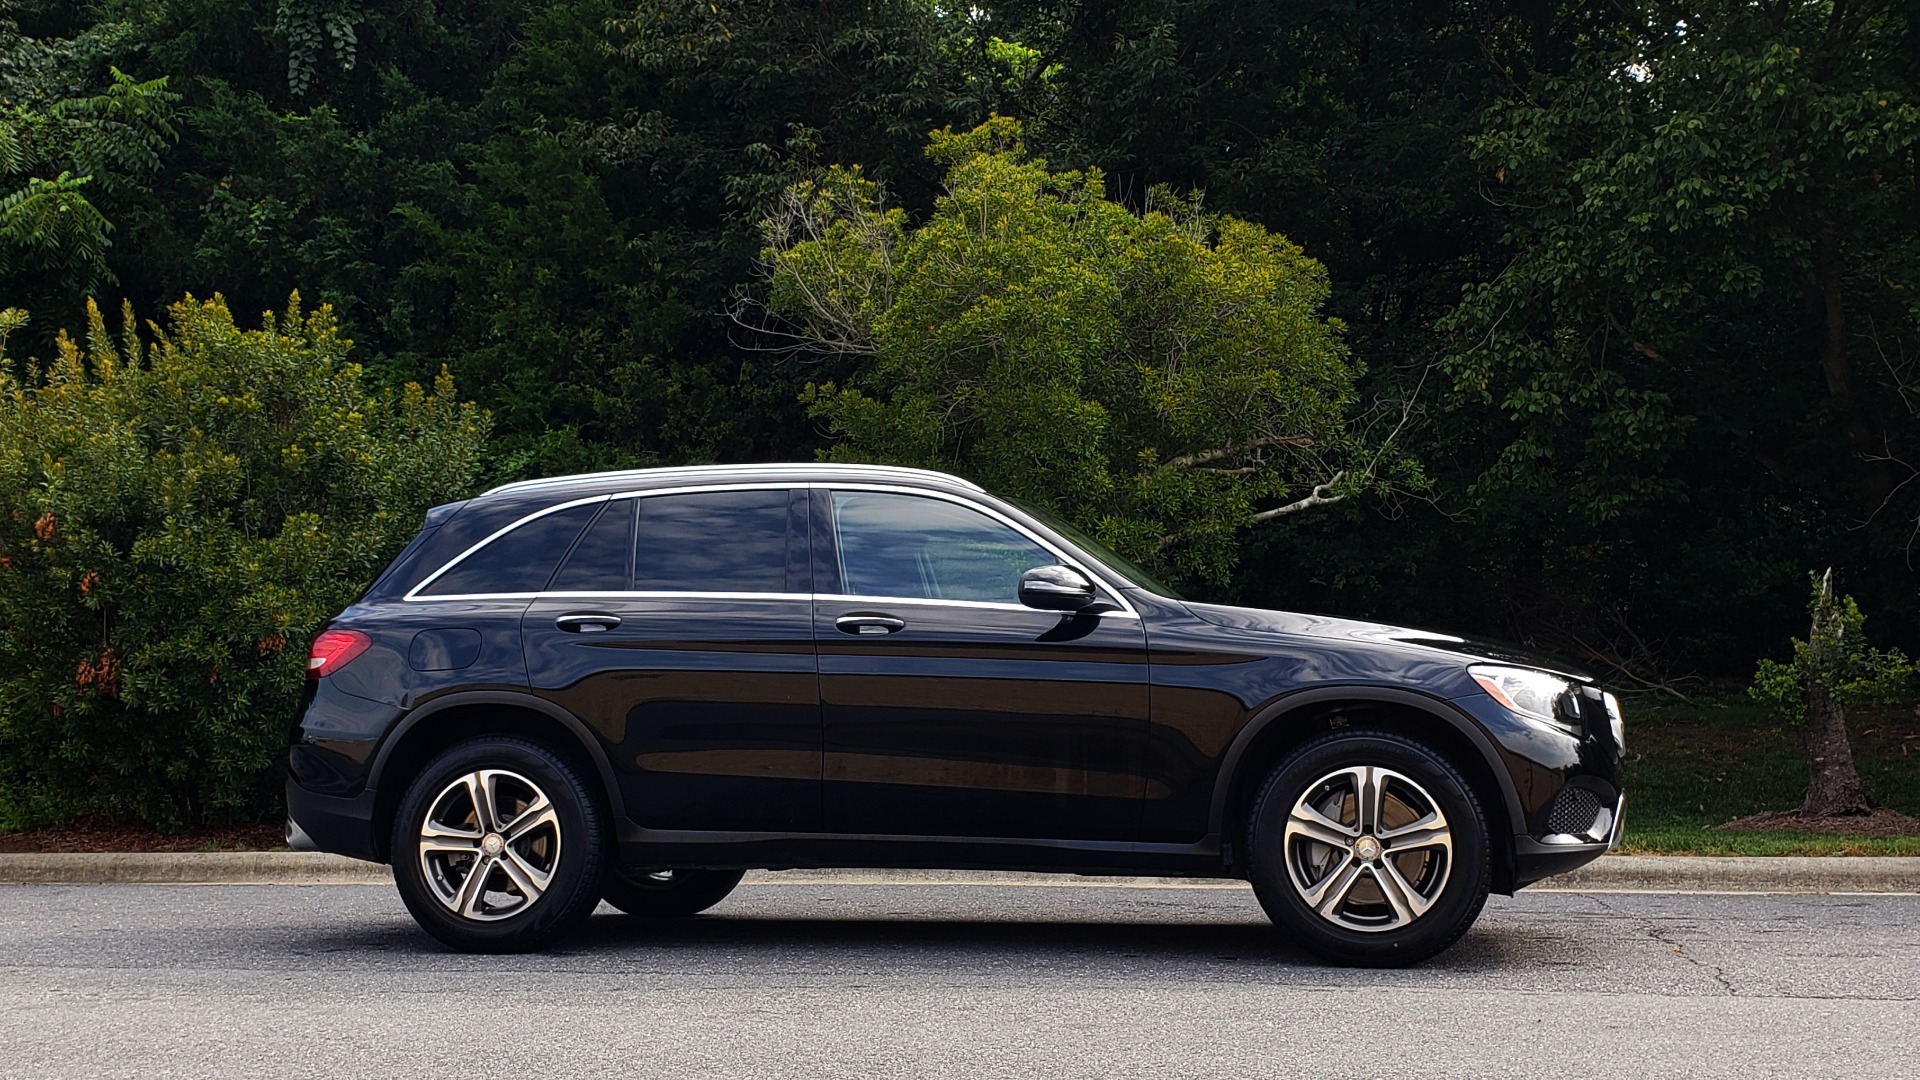 Used 2016 Mercedes-Benz GLC 300 / PANO-ROOF / HEATED SEATS / REARVIEW / NEW TIRES for sale Sold at Formula Imports in Charlotte NC 28227 5